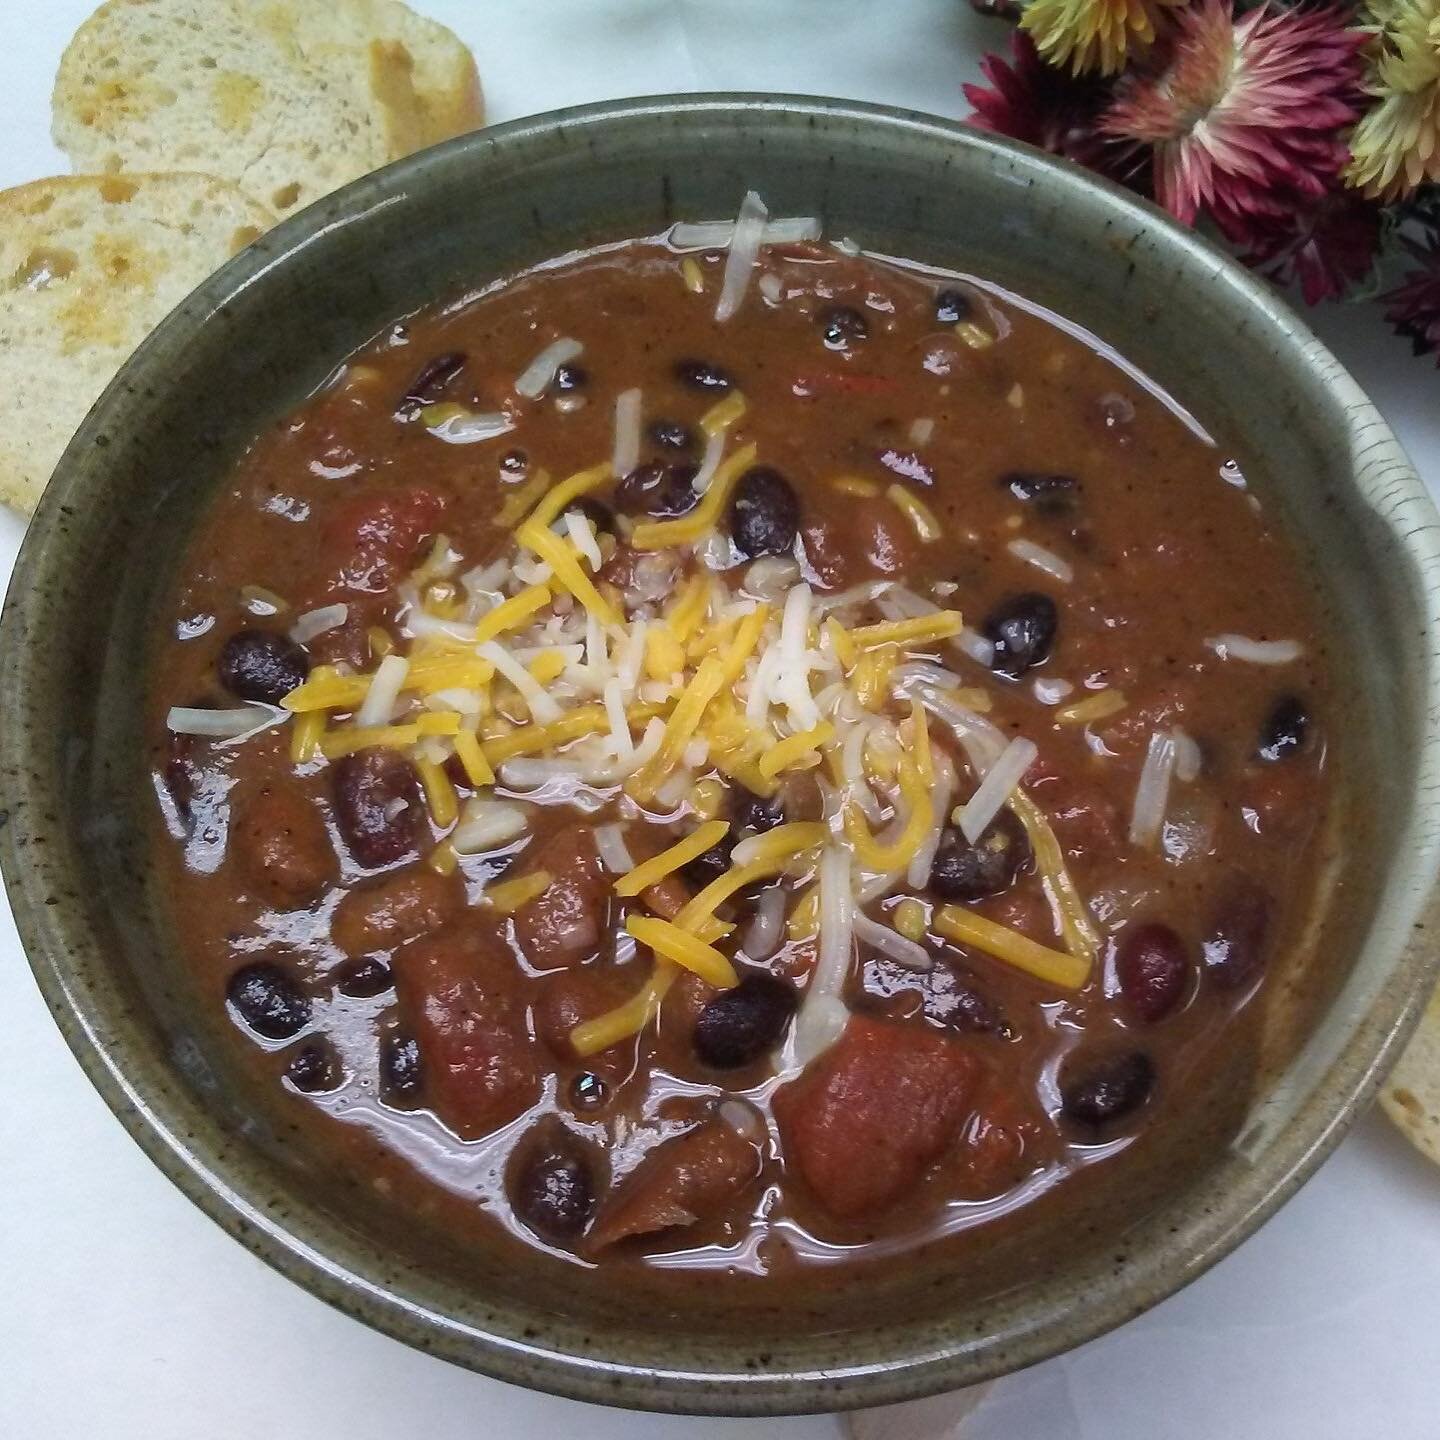 Homemade chili for carry out!